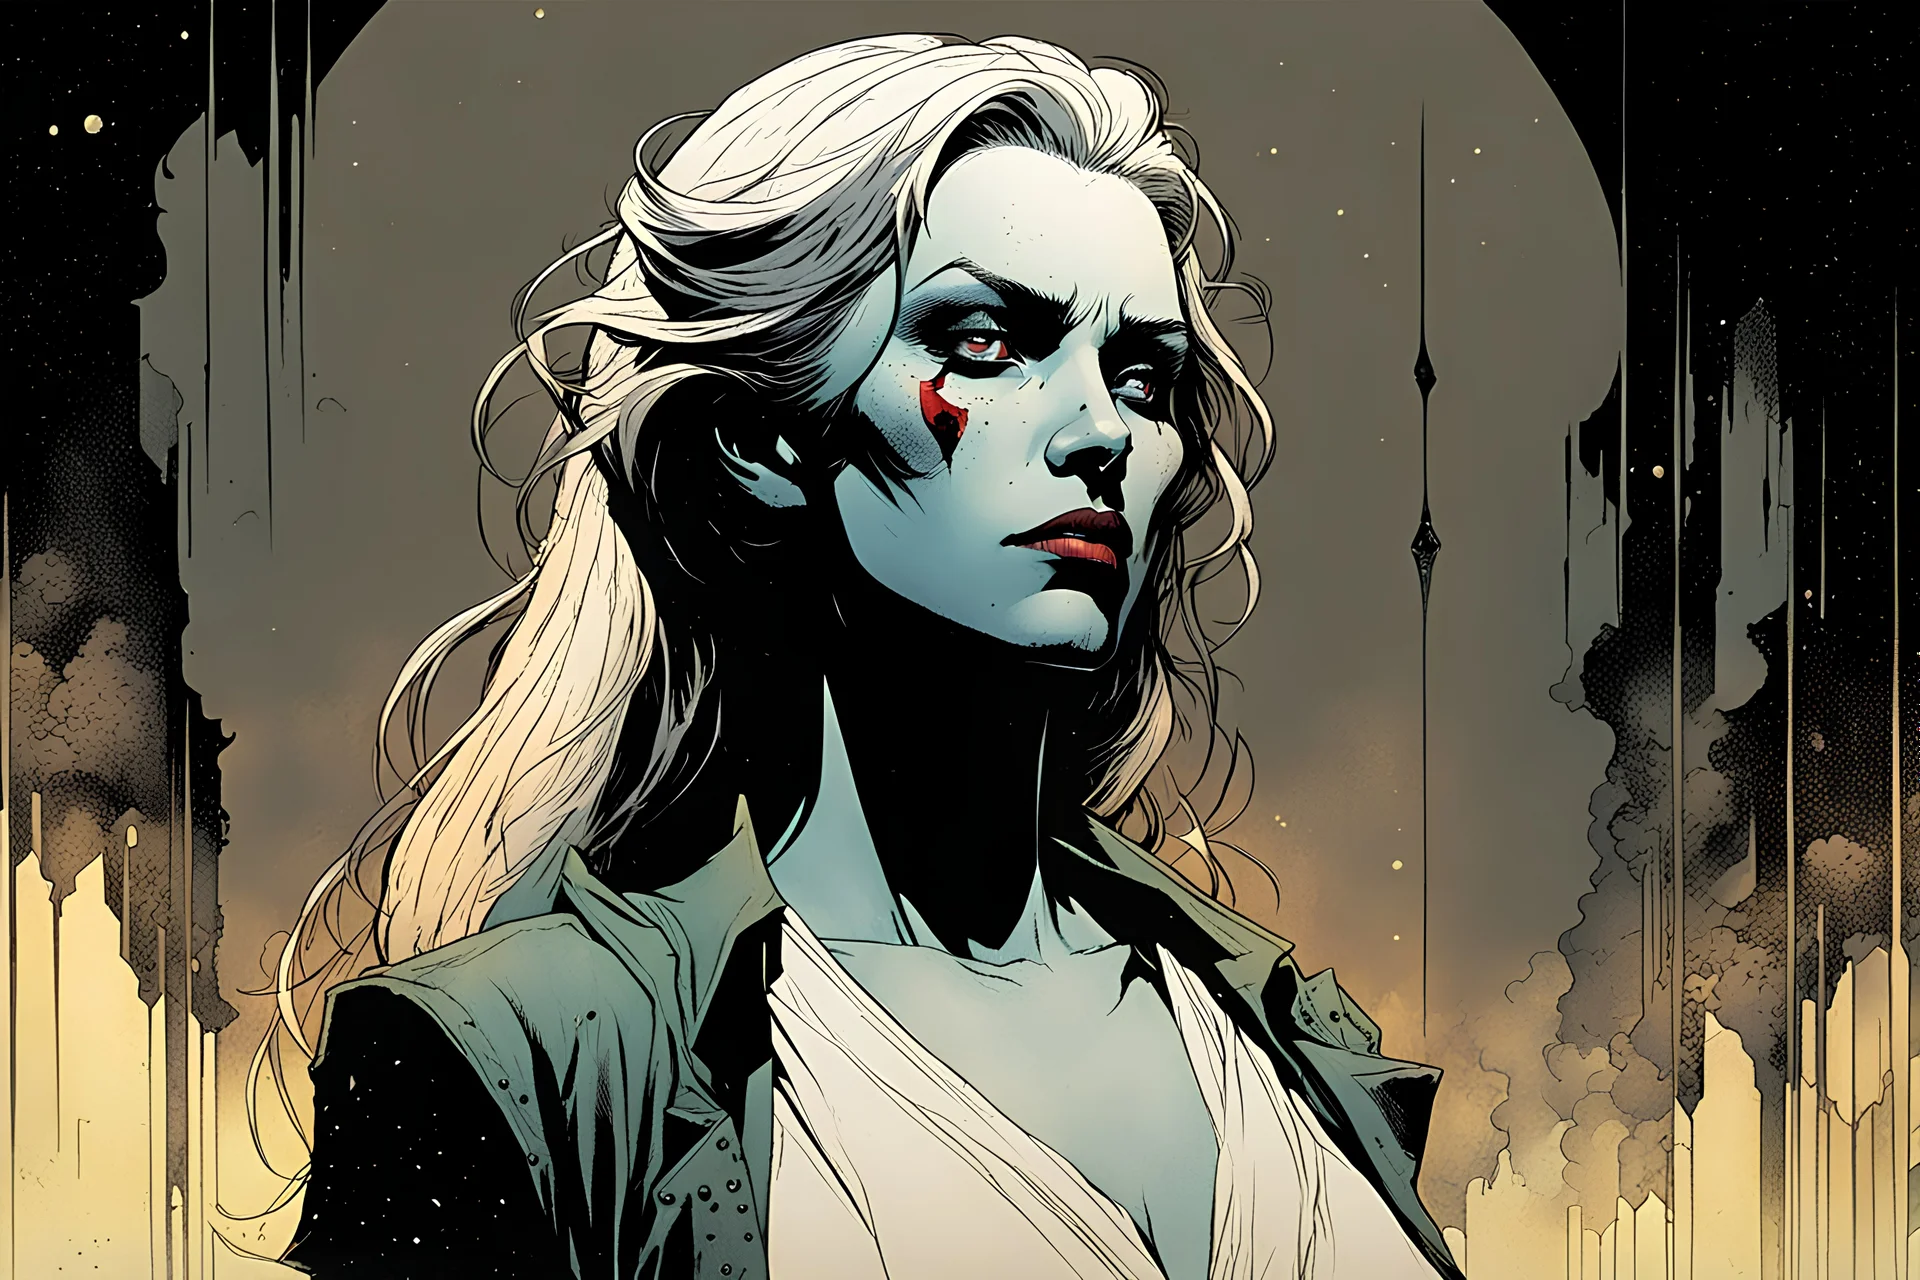 create a hardened, mercenary vampire girl, finely defined and sharply lined facial features in the comic book art style of Mike Mignola, Bill Sienkiewicz and Jean Giraud Moebius, , highly detailed, grainy, gritty textures, , dramatic natural lighting